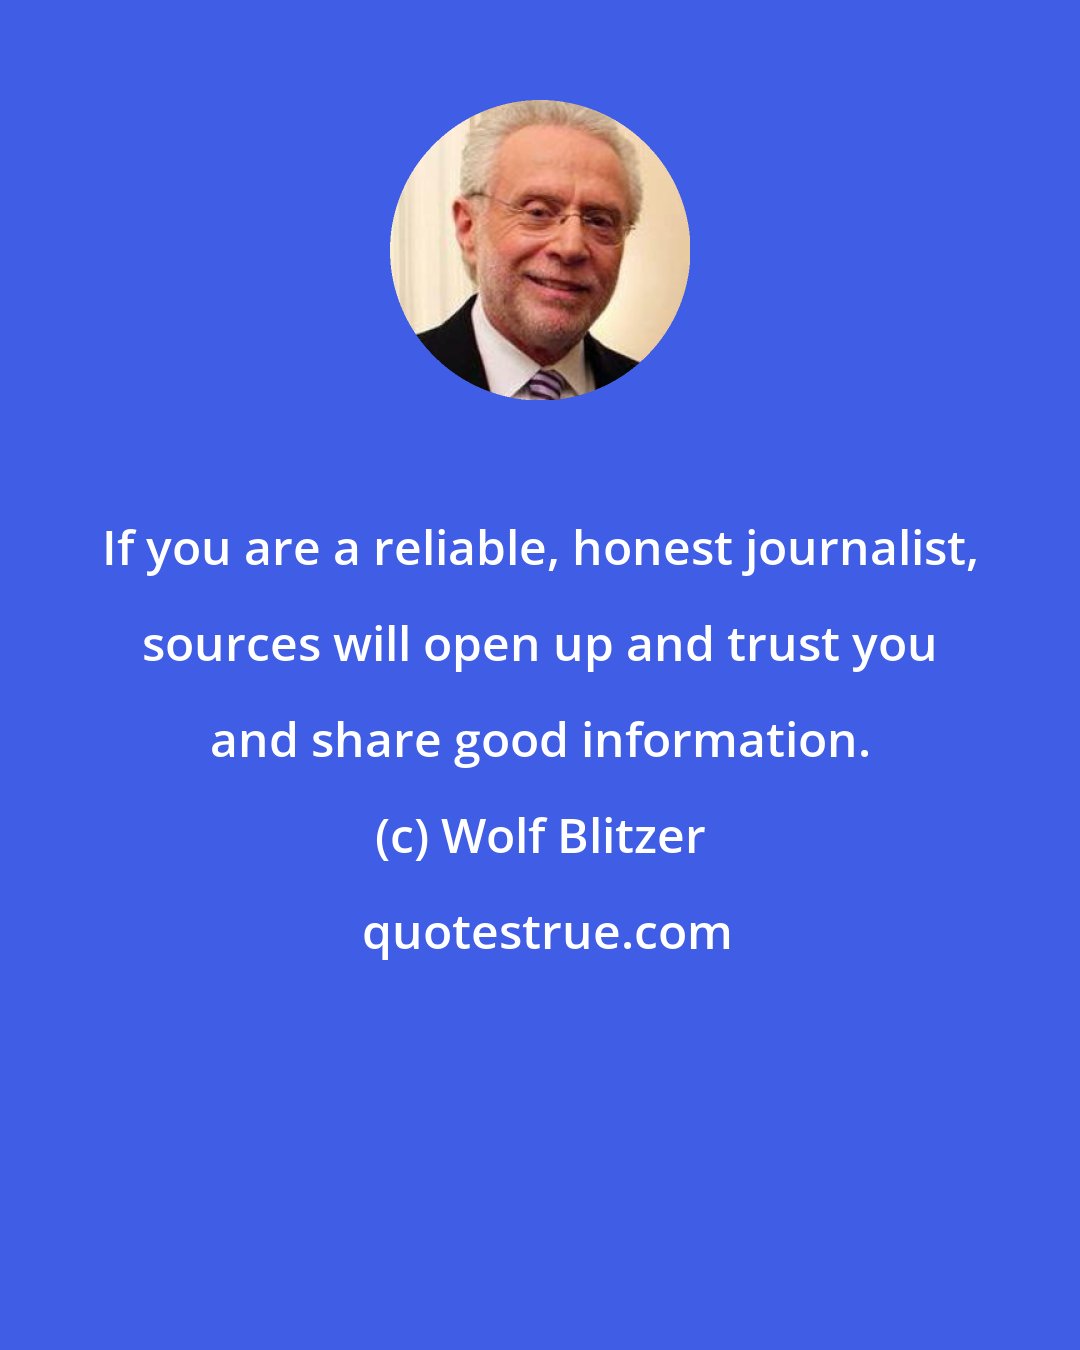 Wolf Blitzer: If you are a reliable, honest journalist, sources will open up and trust you and share good information.